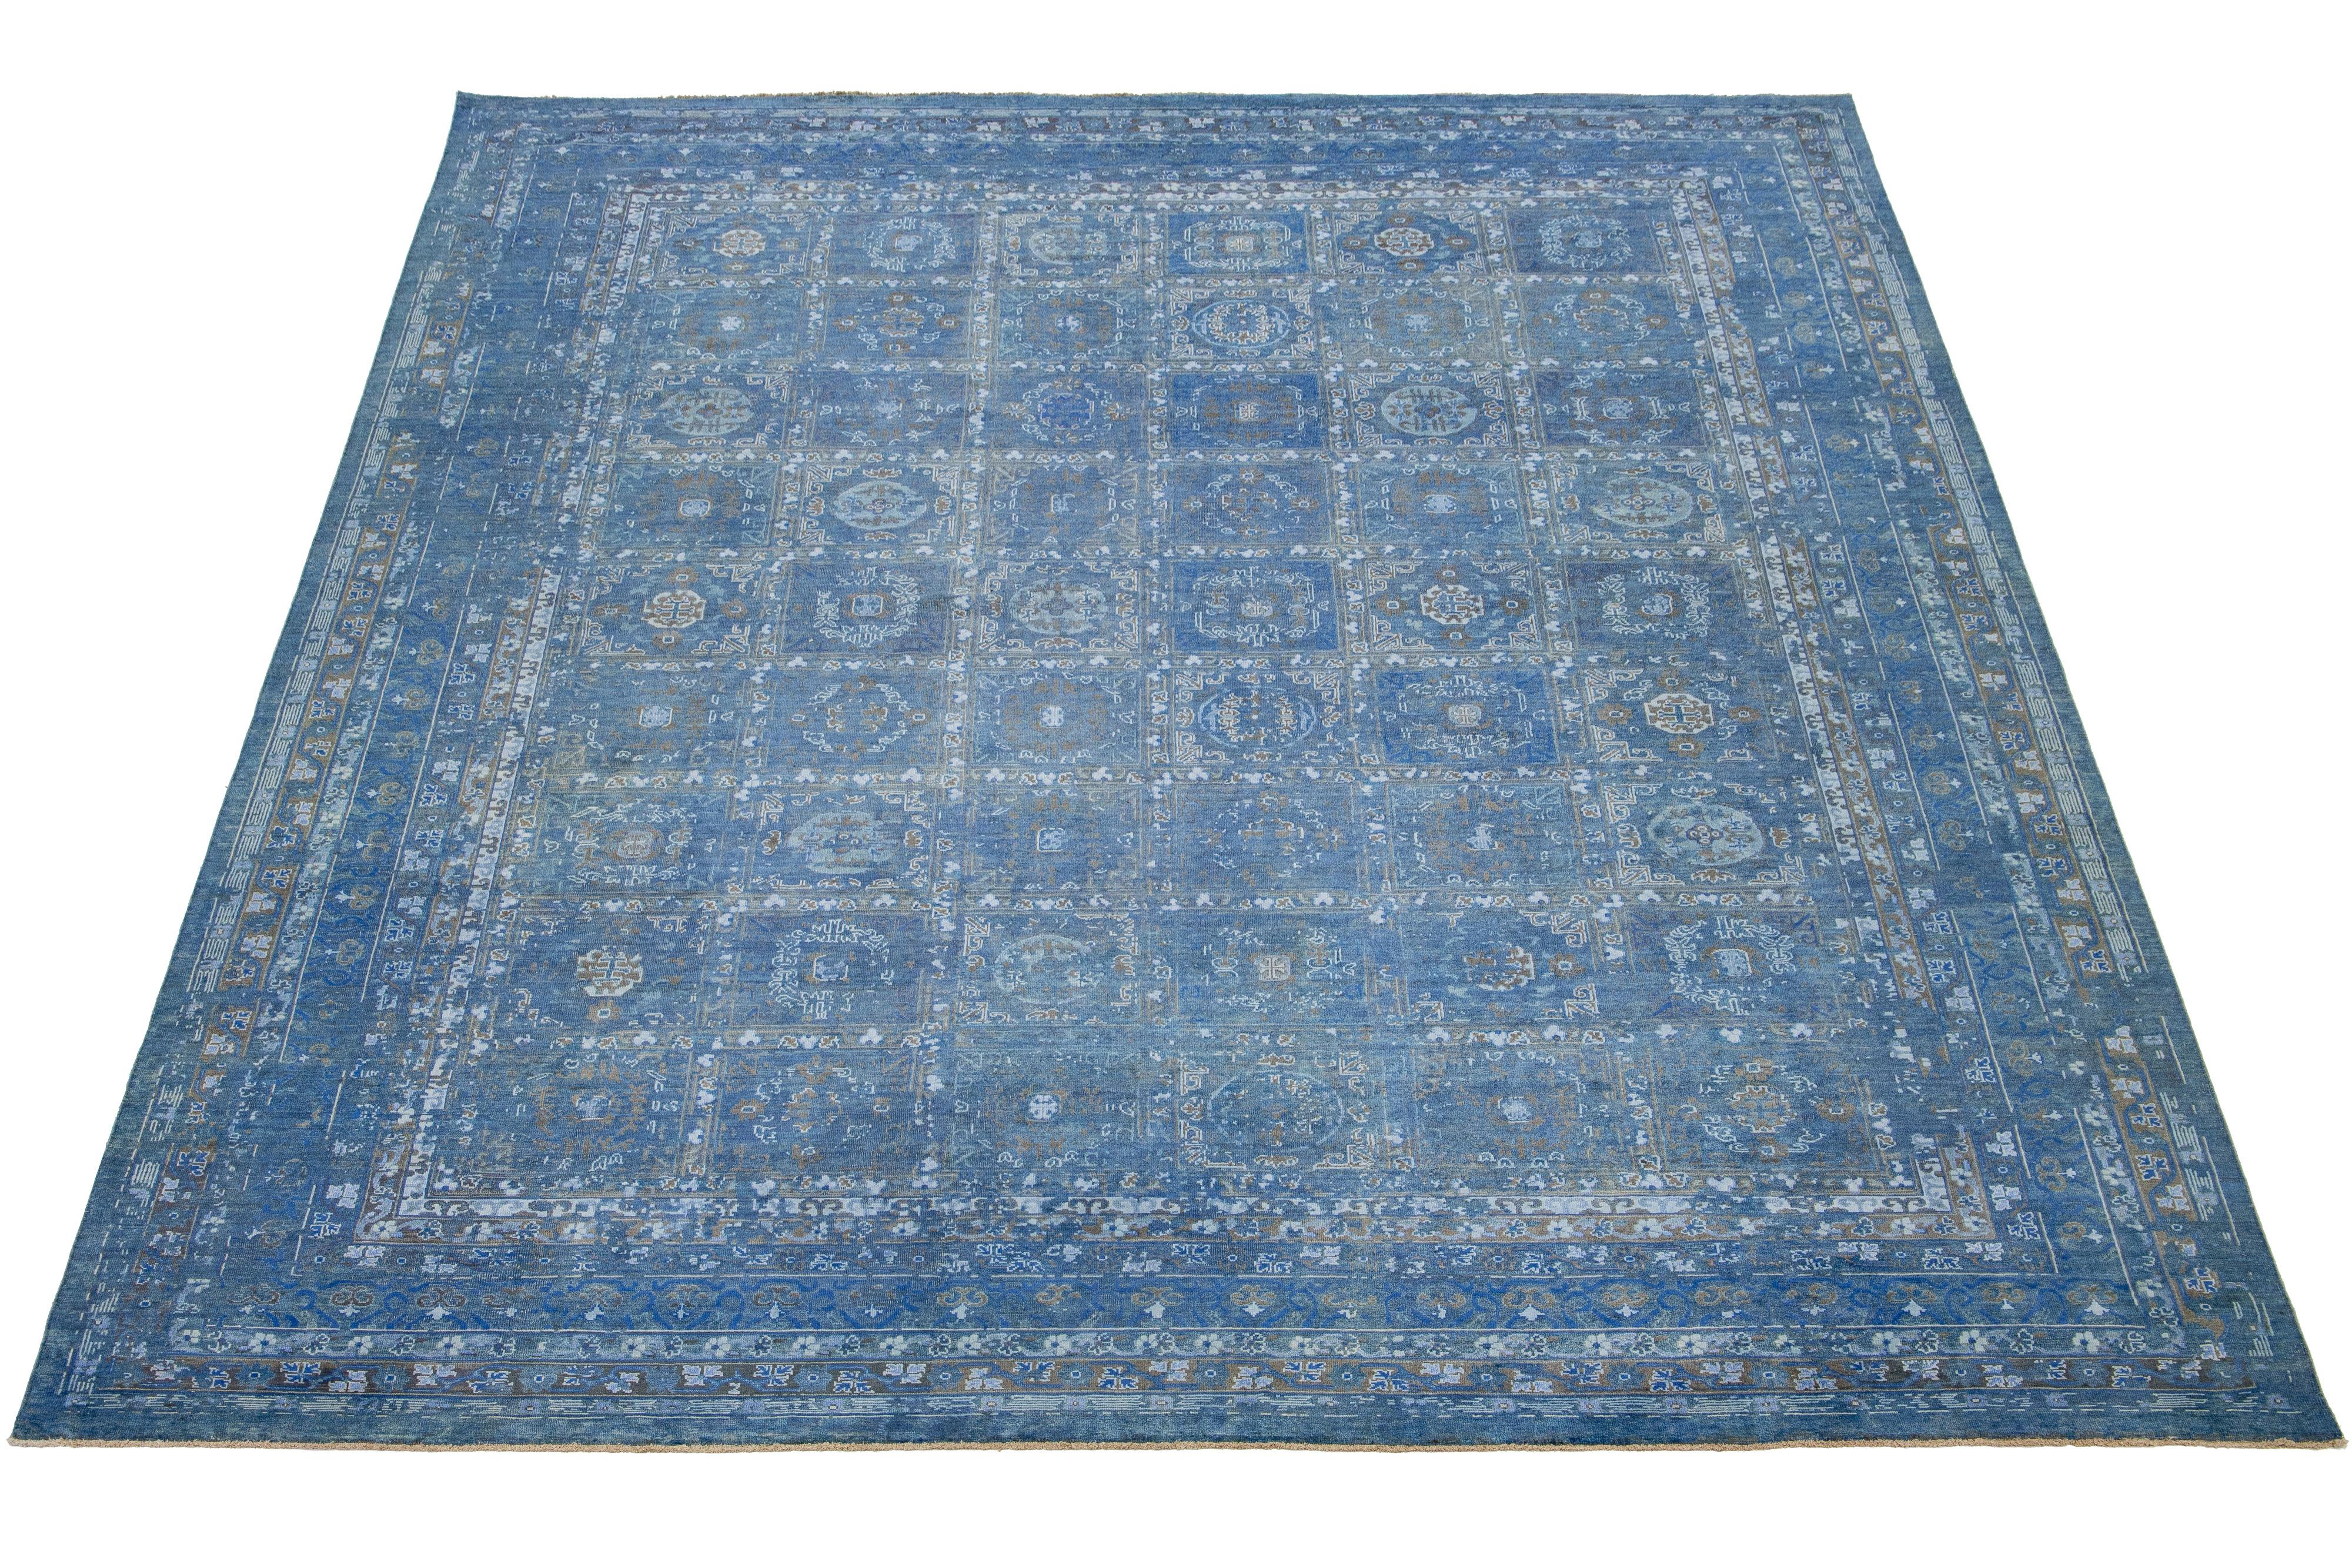 Crafted from hand-knotted wool, this exquisite rug showcases a stunning blue backdrop with an elegant all-over floral design. The addition of ivory and brown accents brings a touch of Transitional charm to its overall look.

This rug measures 11'10